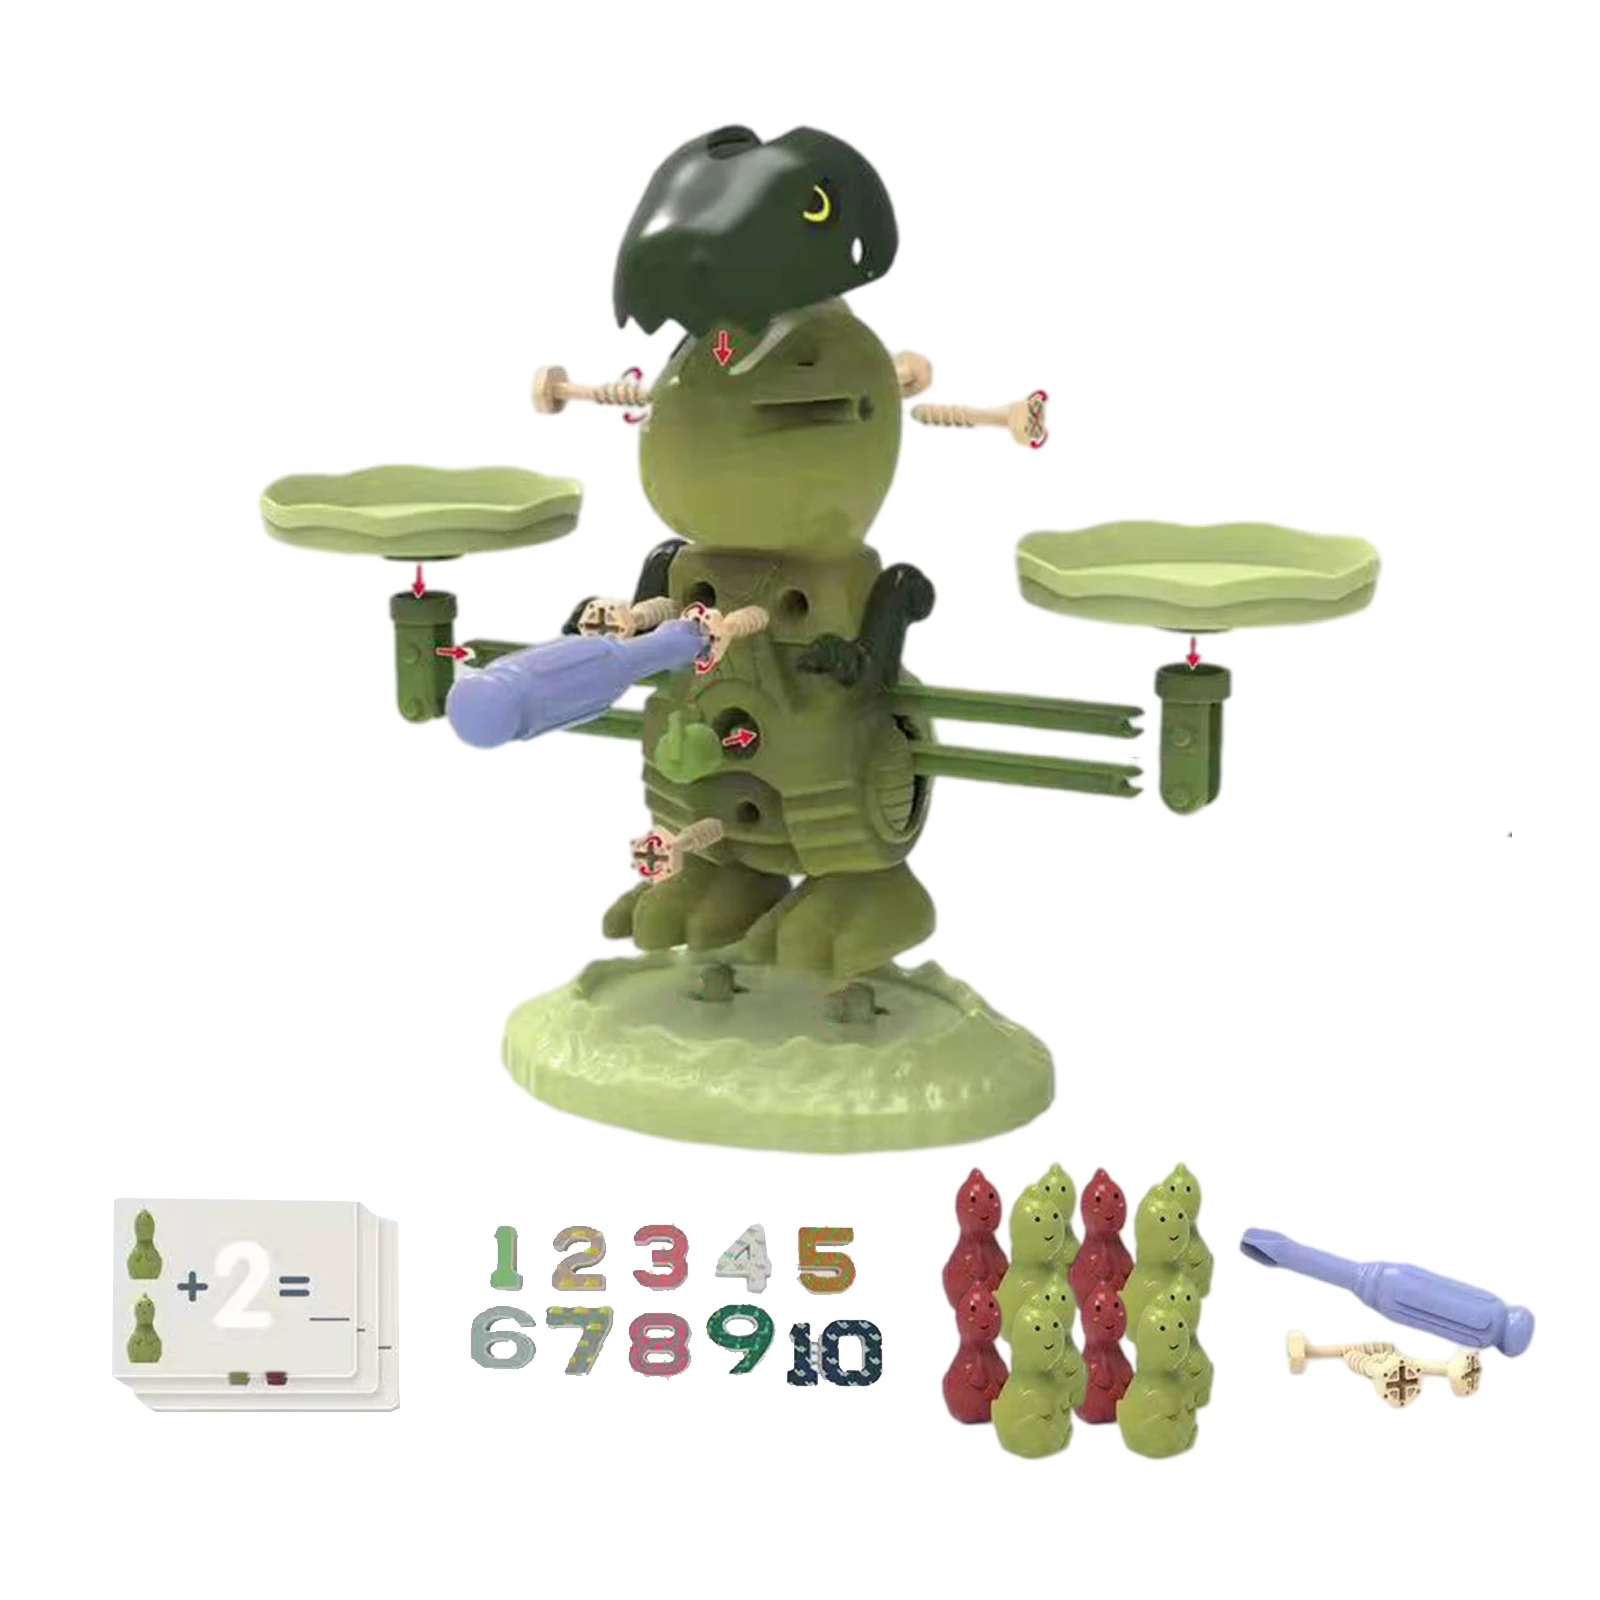 Cool Math Game, Dinosaur Balance Counting Toys for Boys & Girls Educational Number Toy Fun Children`s Gift STEM Learning Age 3+